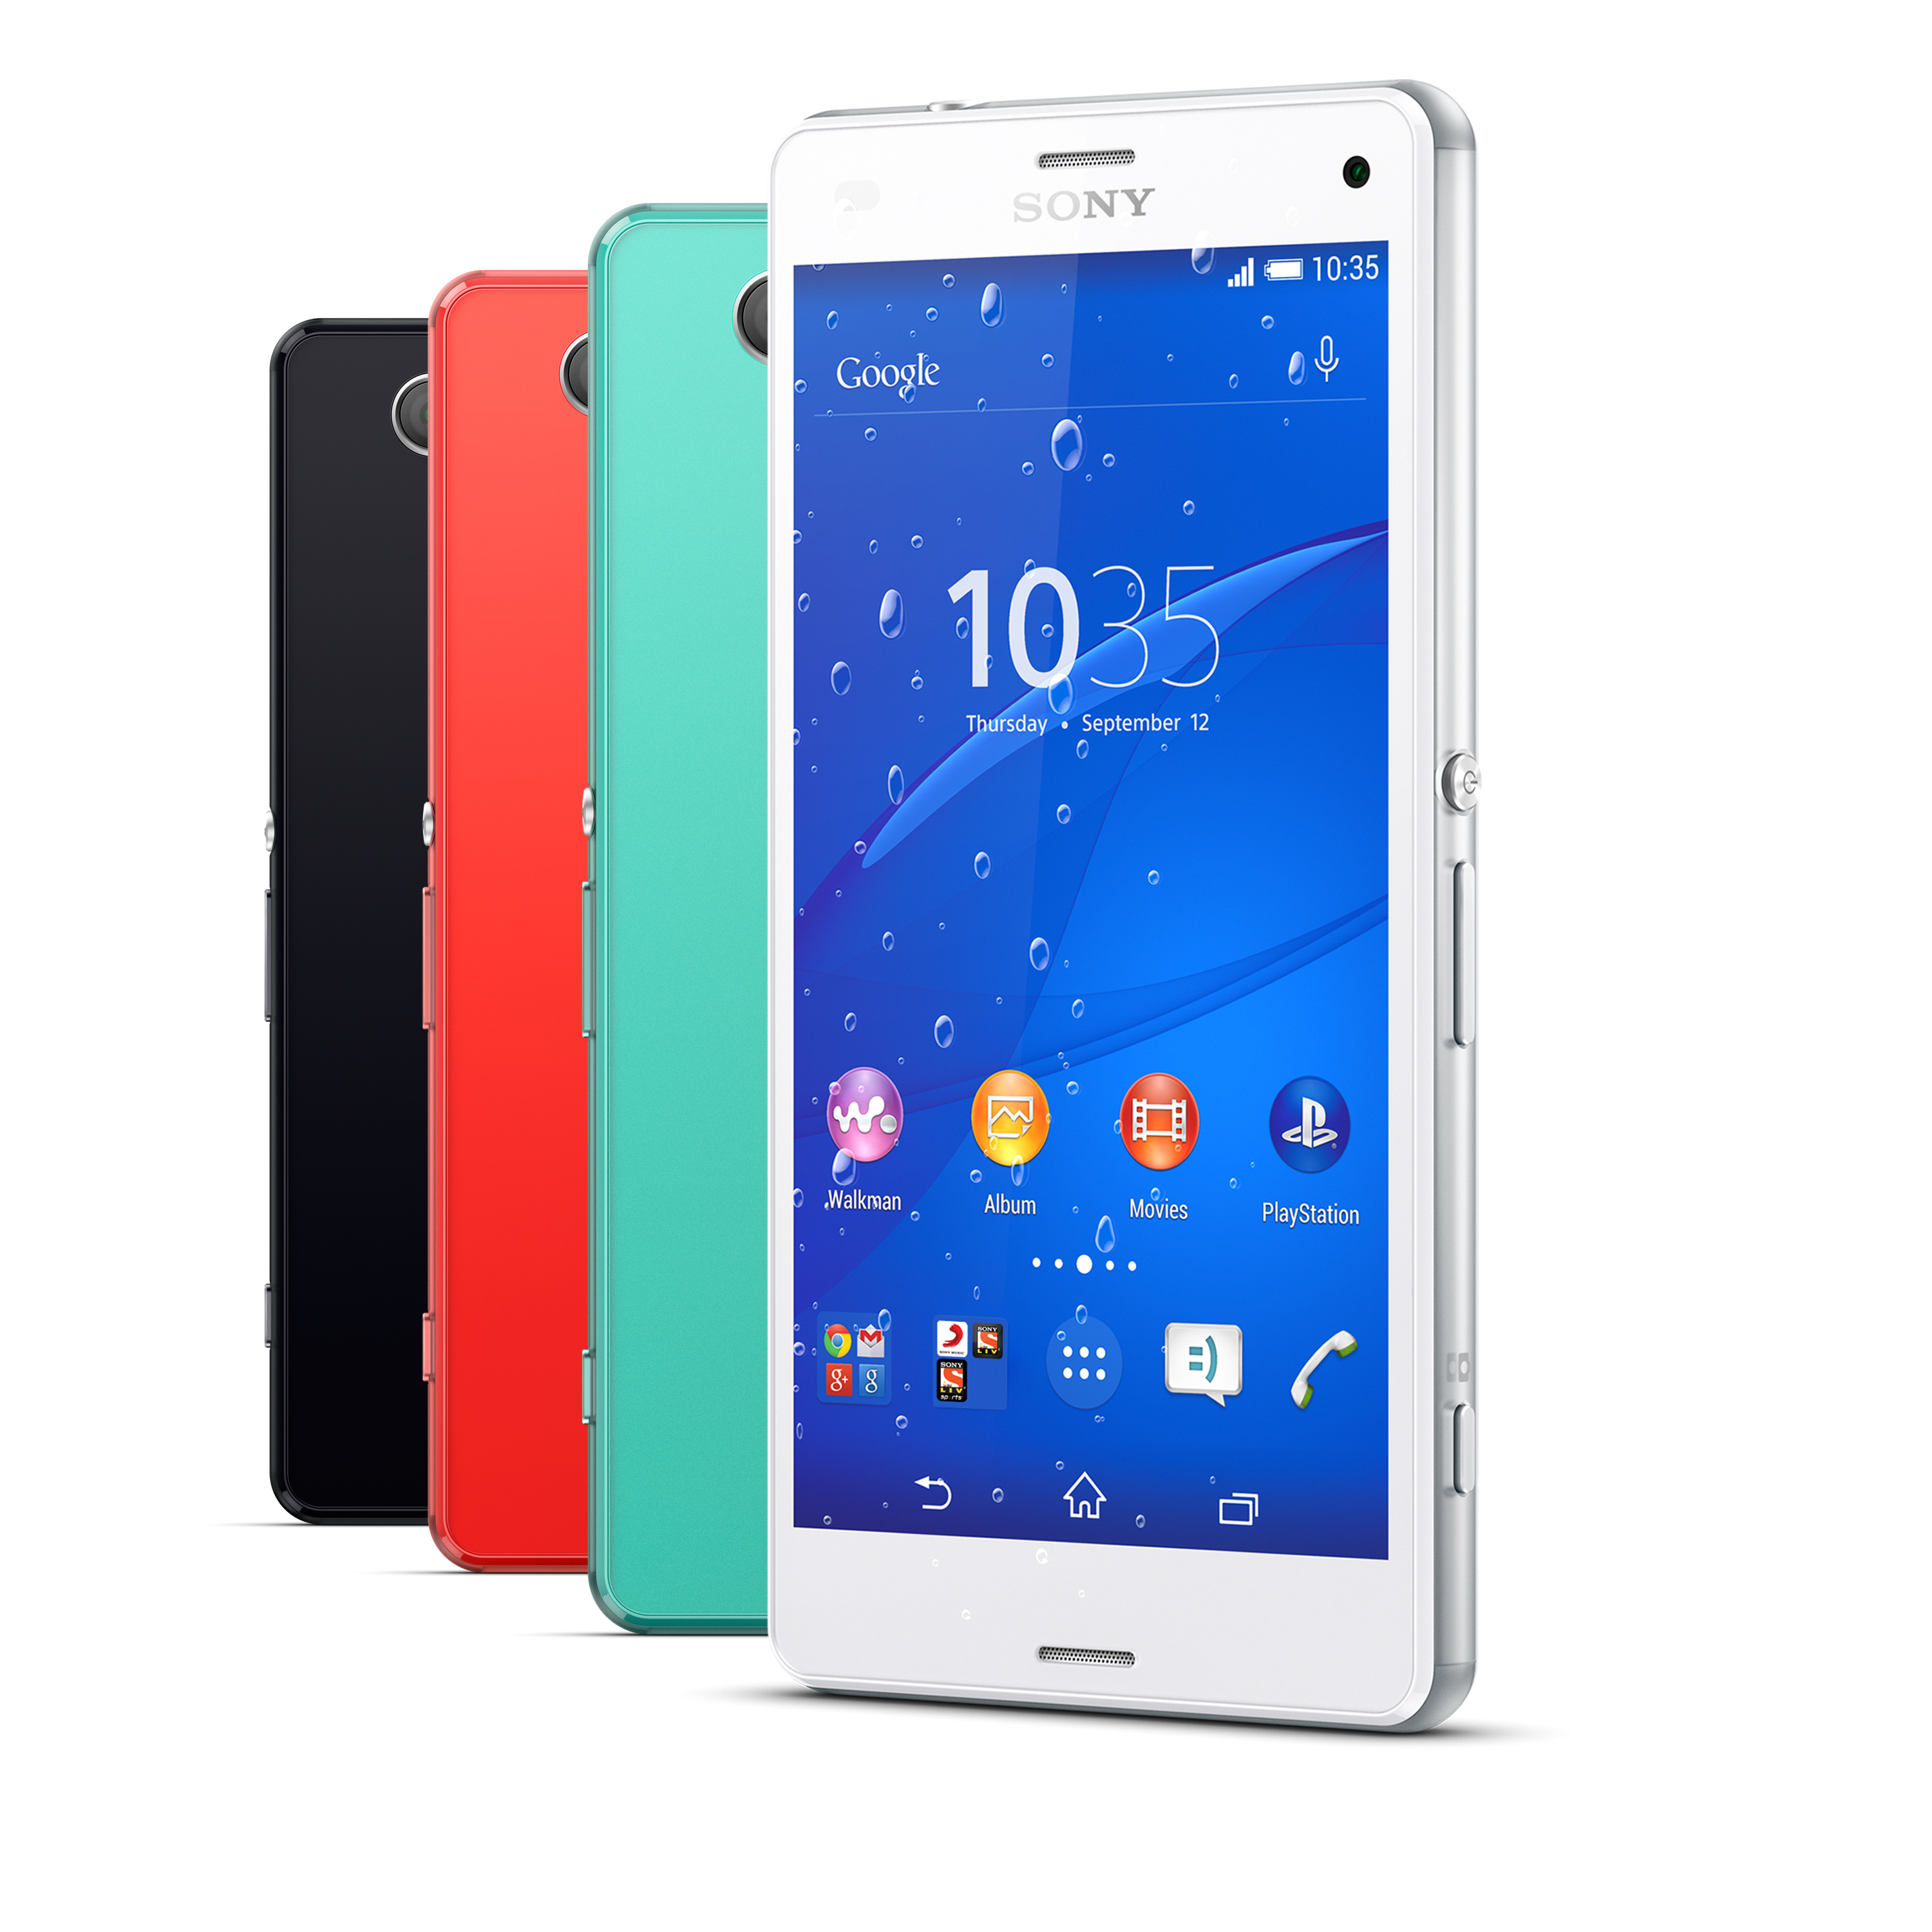 Sony launches the new Xperia Z3 and Xperia Z3 Compact flagships in India